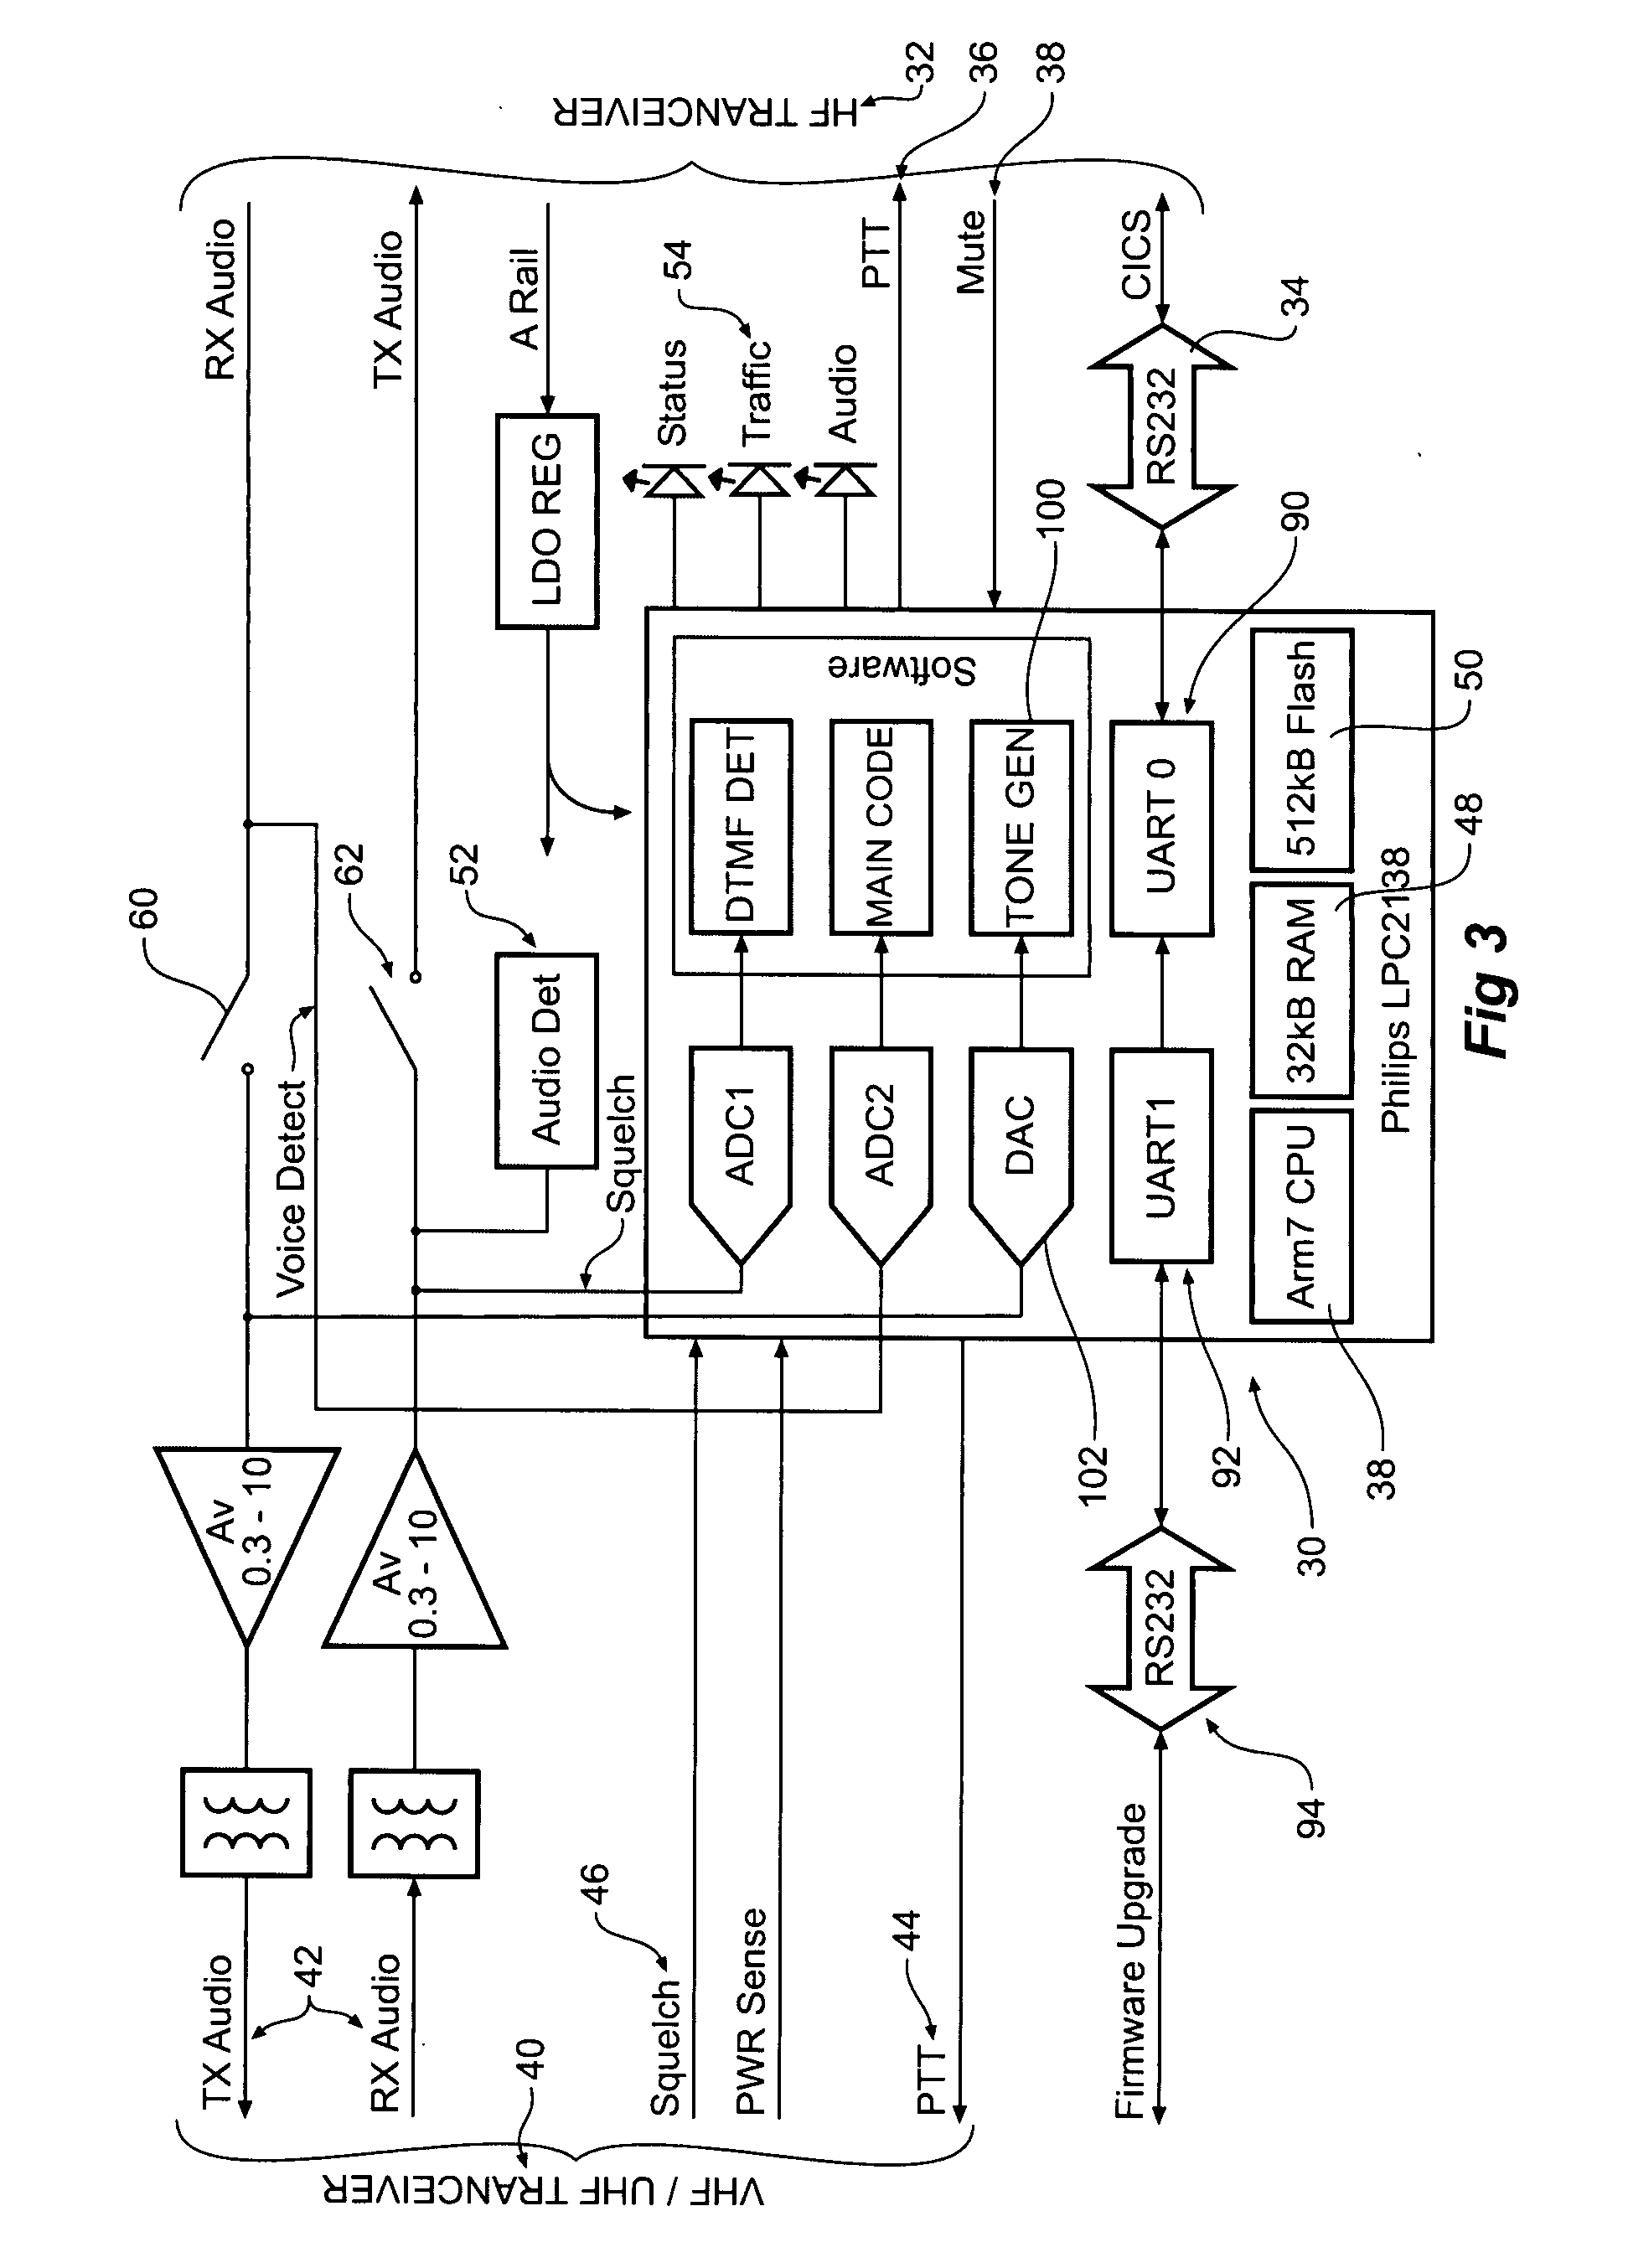 Control element for simplex HF to VHF/UHF cross-band system with transmission breakthrough